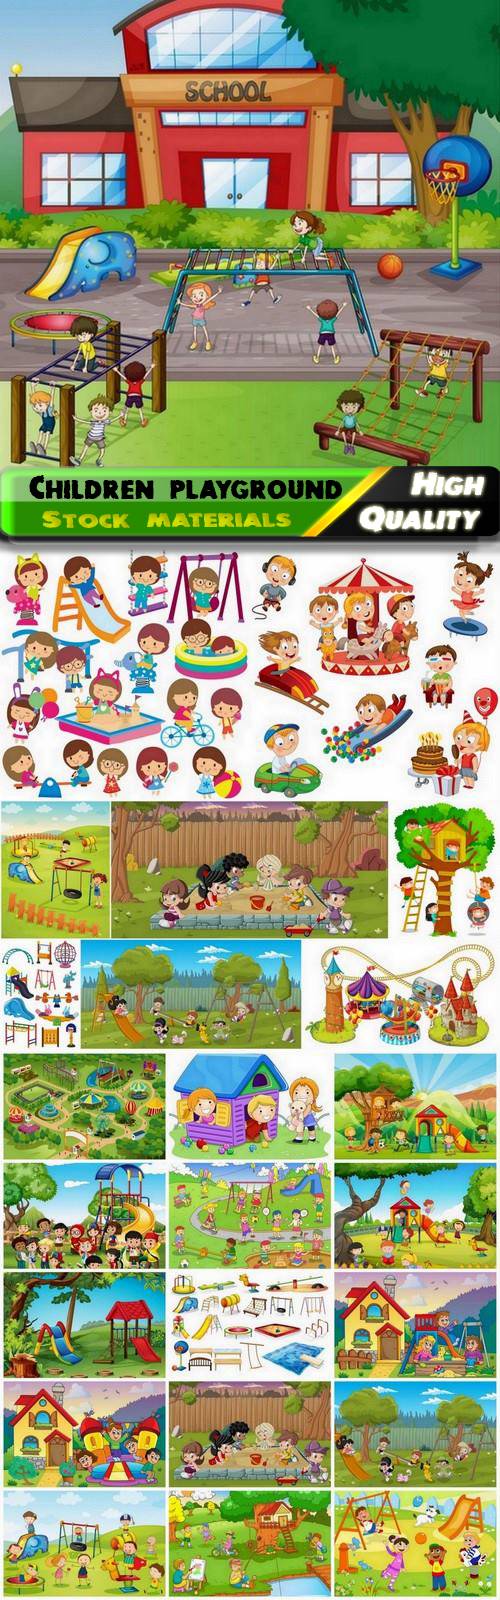 Children playground and kids playing and have fun - 25 Eps